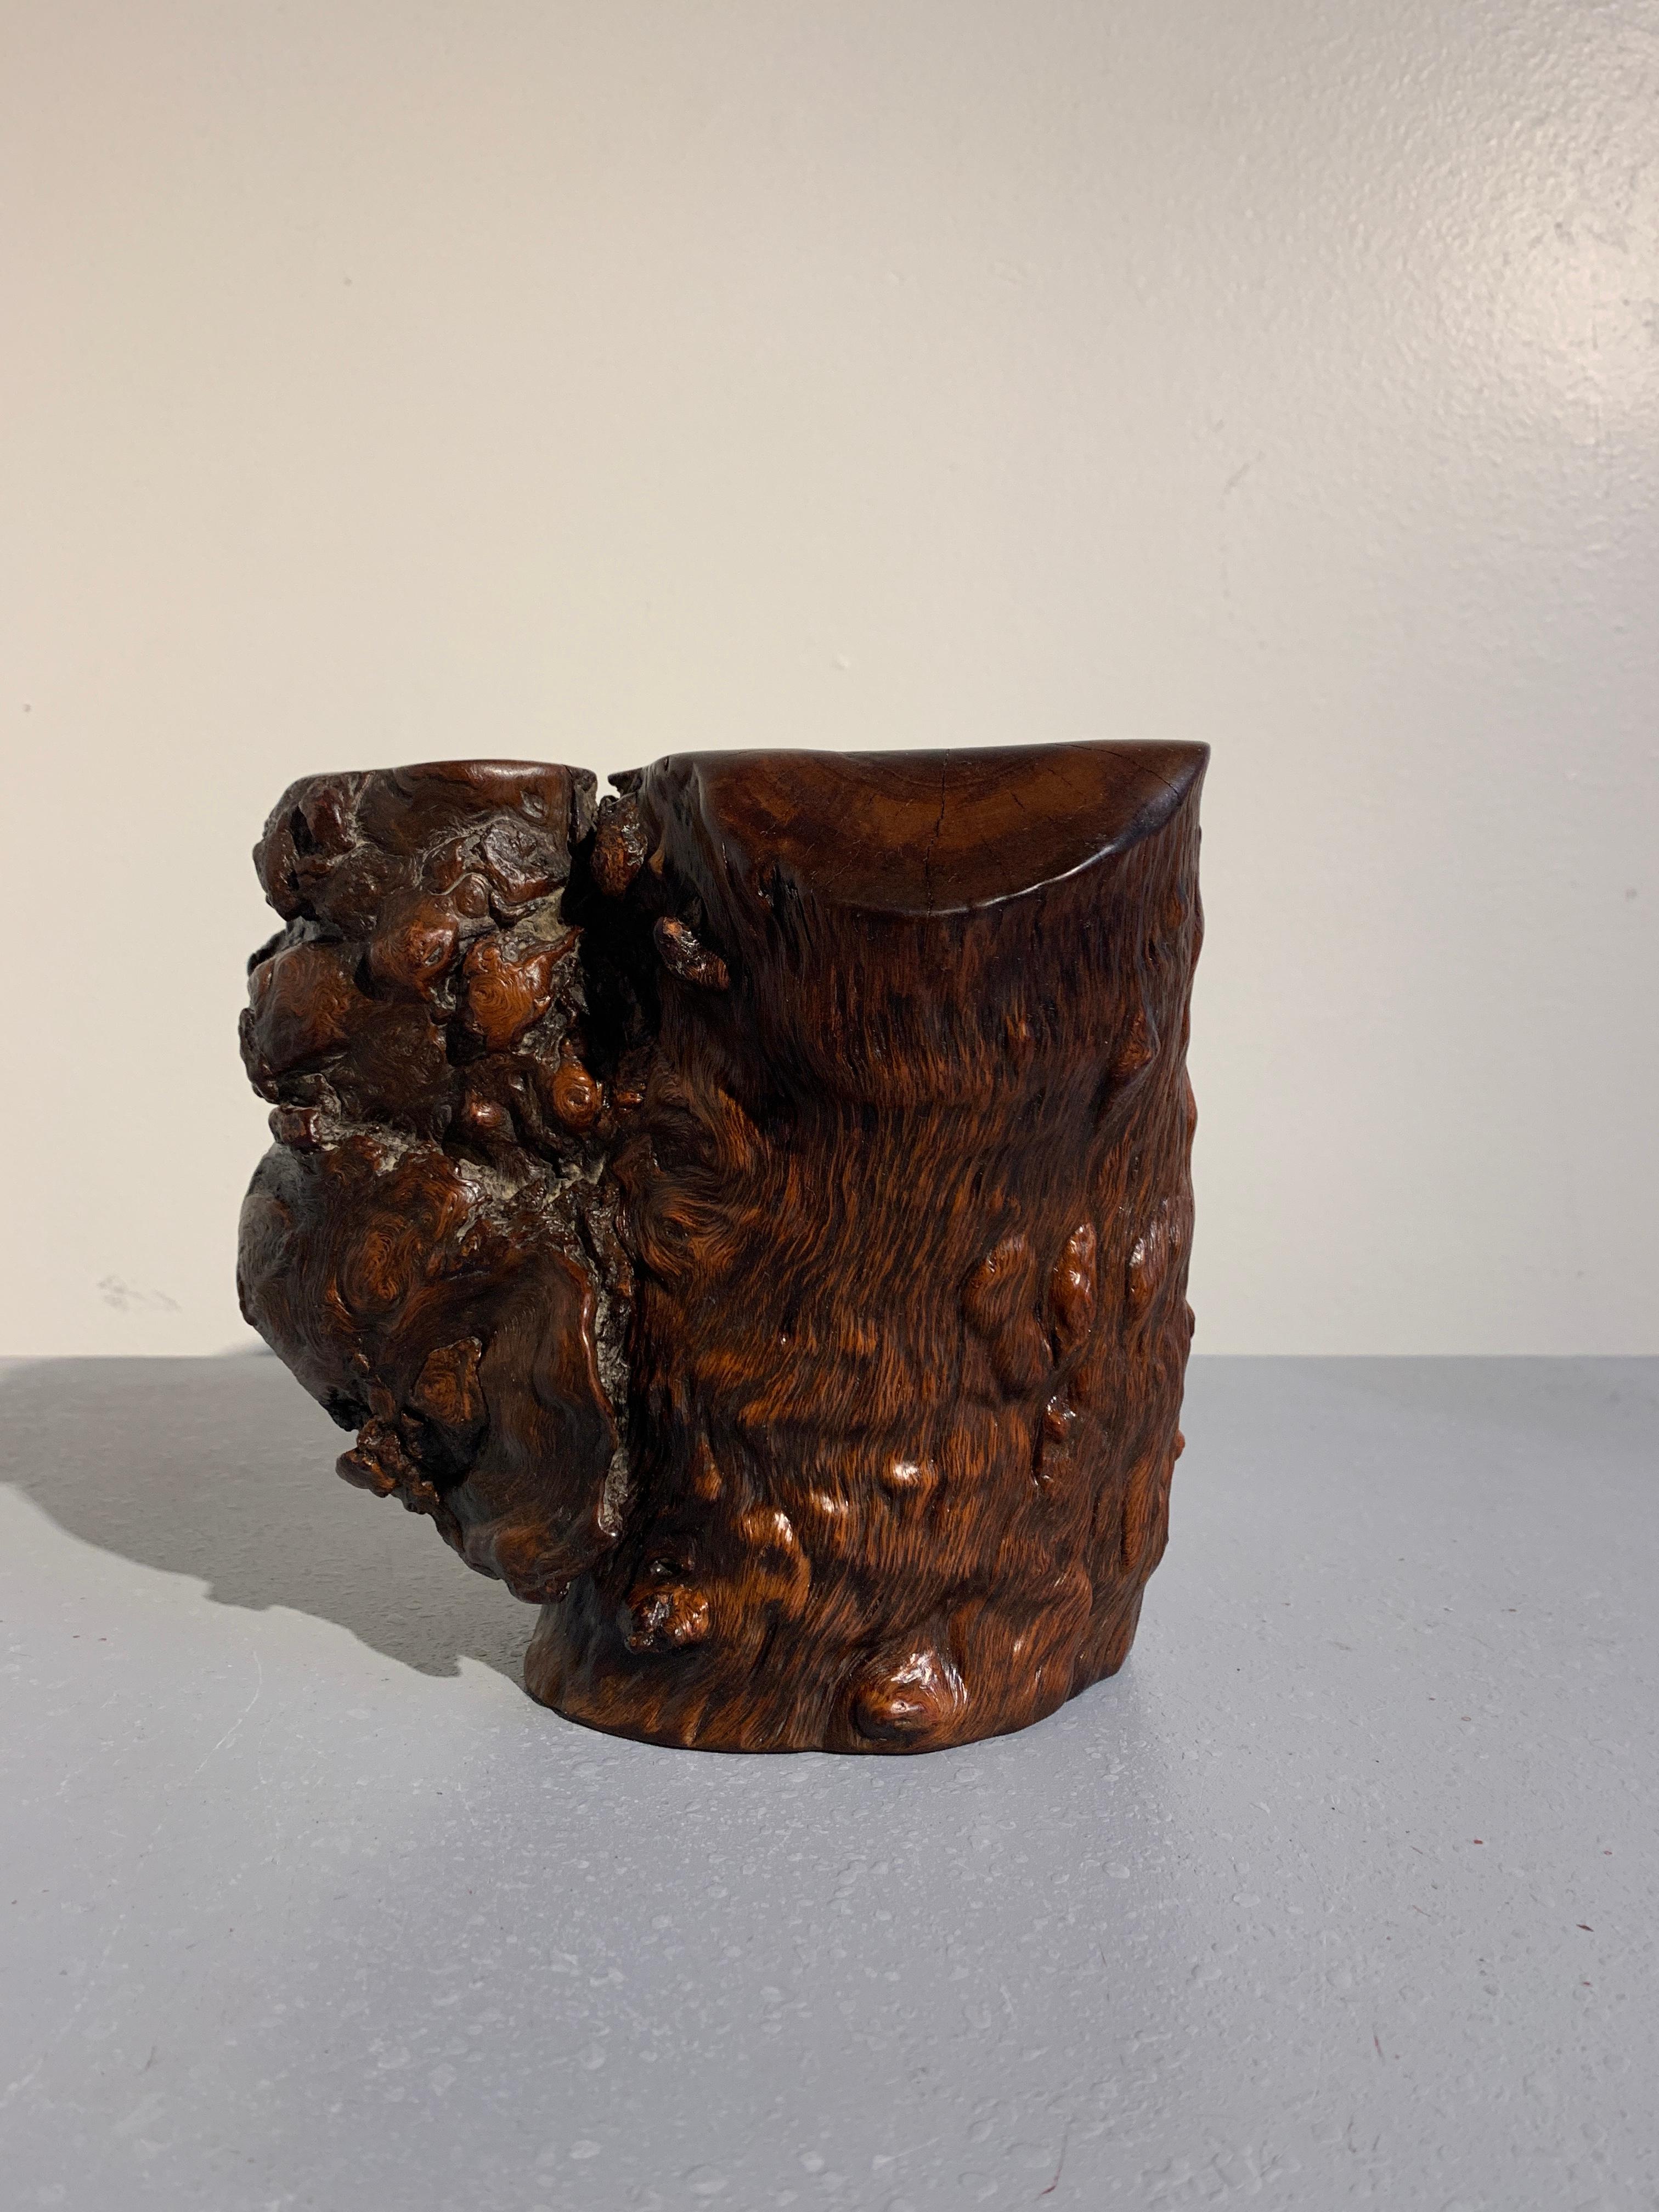 A stunningly figured and beautifully grained Chinese Republic period burled zhazhen hardwood brushpot.

The burl wood brush pot, made of precious zhazhen (mulberry) wood, has been taken from he natural trunk of the tree. Of libation cup form, the